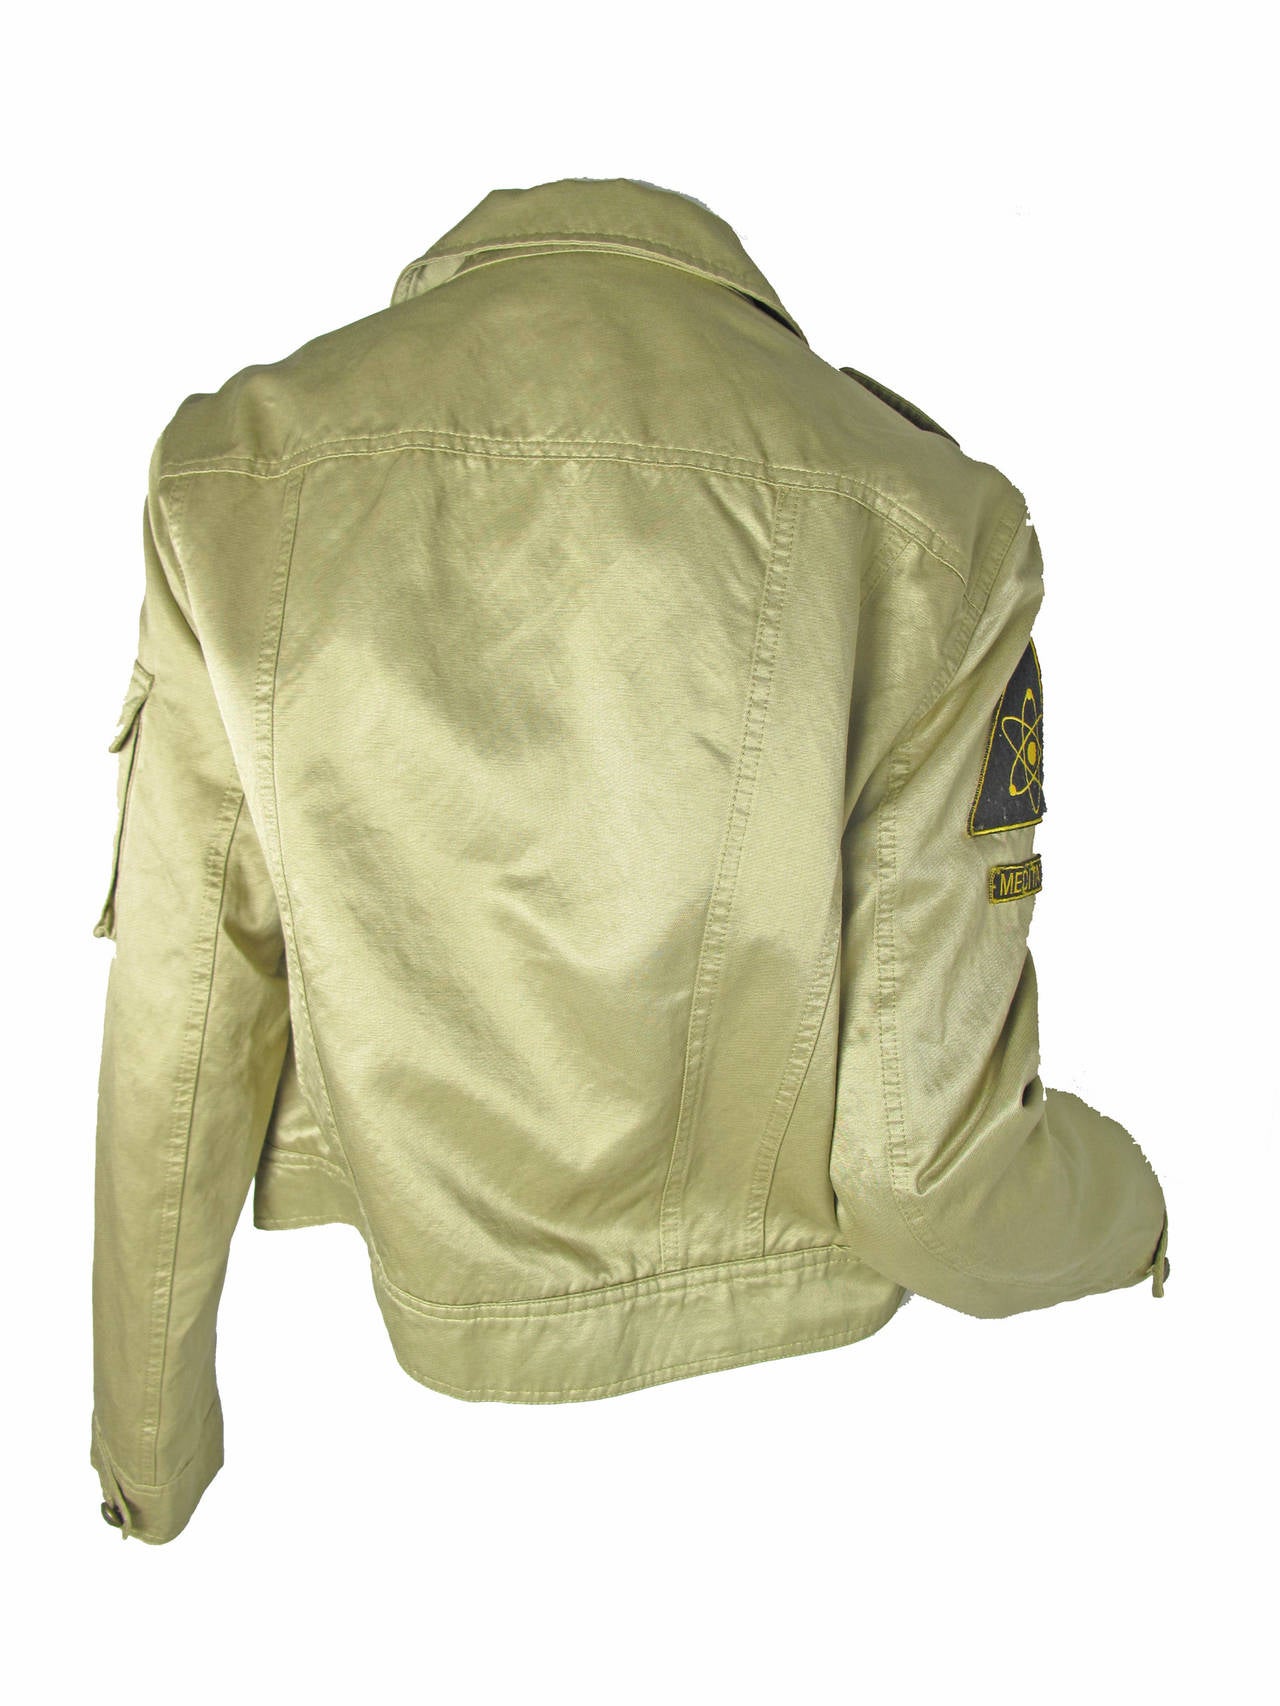 Moschino Satin Alternative Army Jacket : Harmony & Meditation In Excellent Condition In Austin, TX